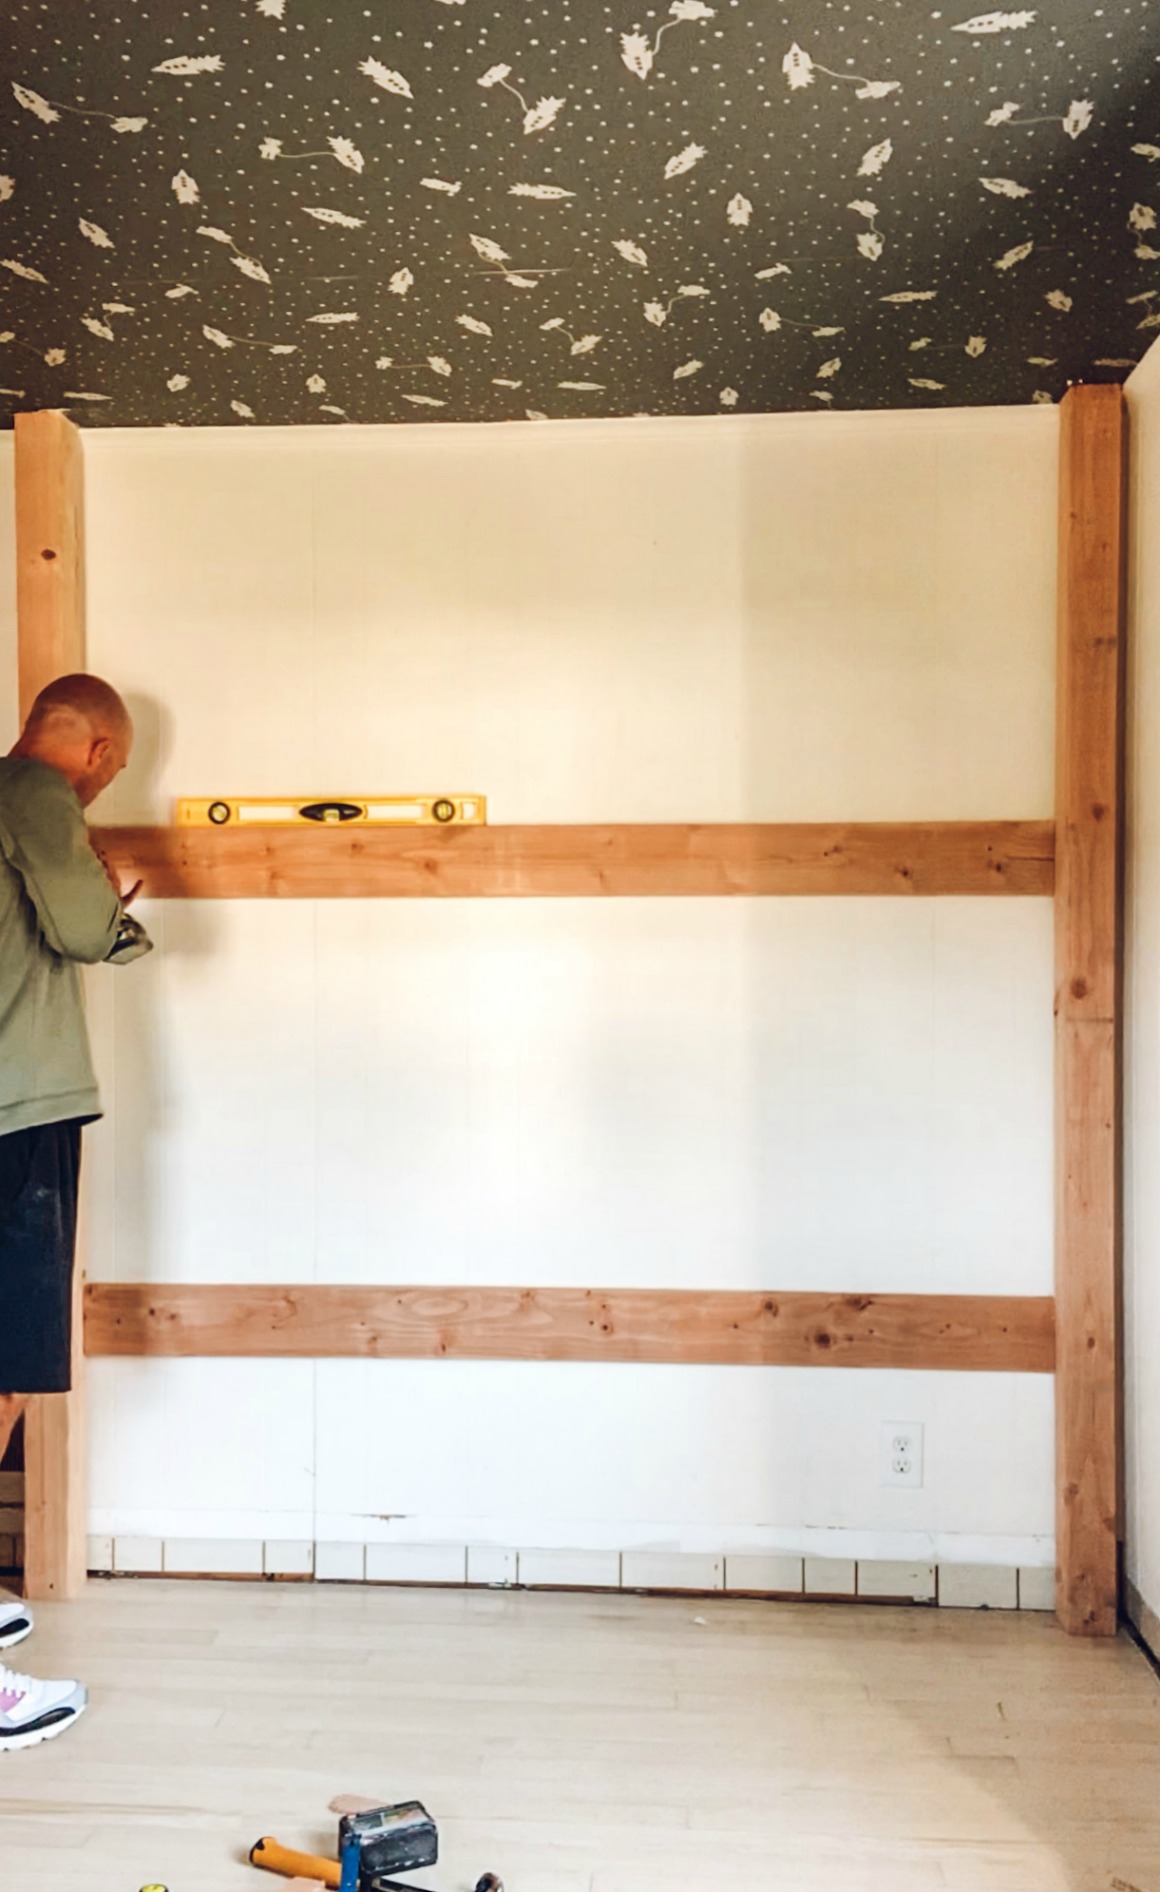 Bunk Beds- How to make a bunk bed- 44- DIY bunk bed- How to build a bunk bed